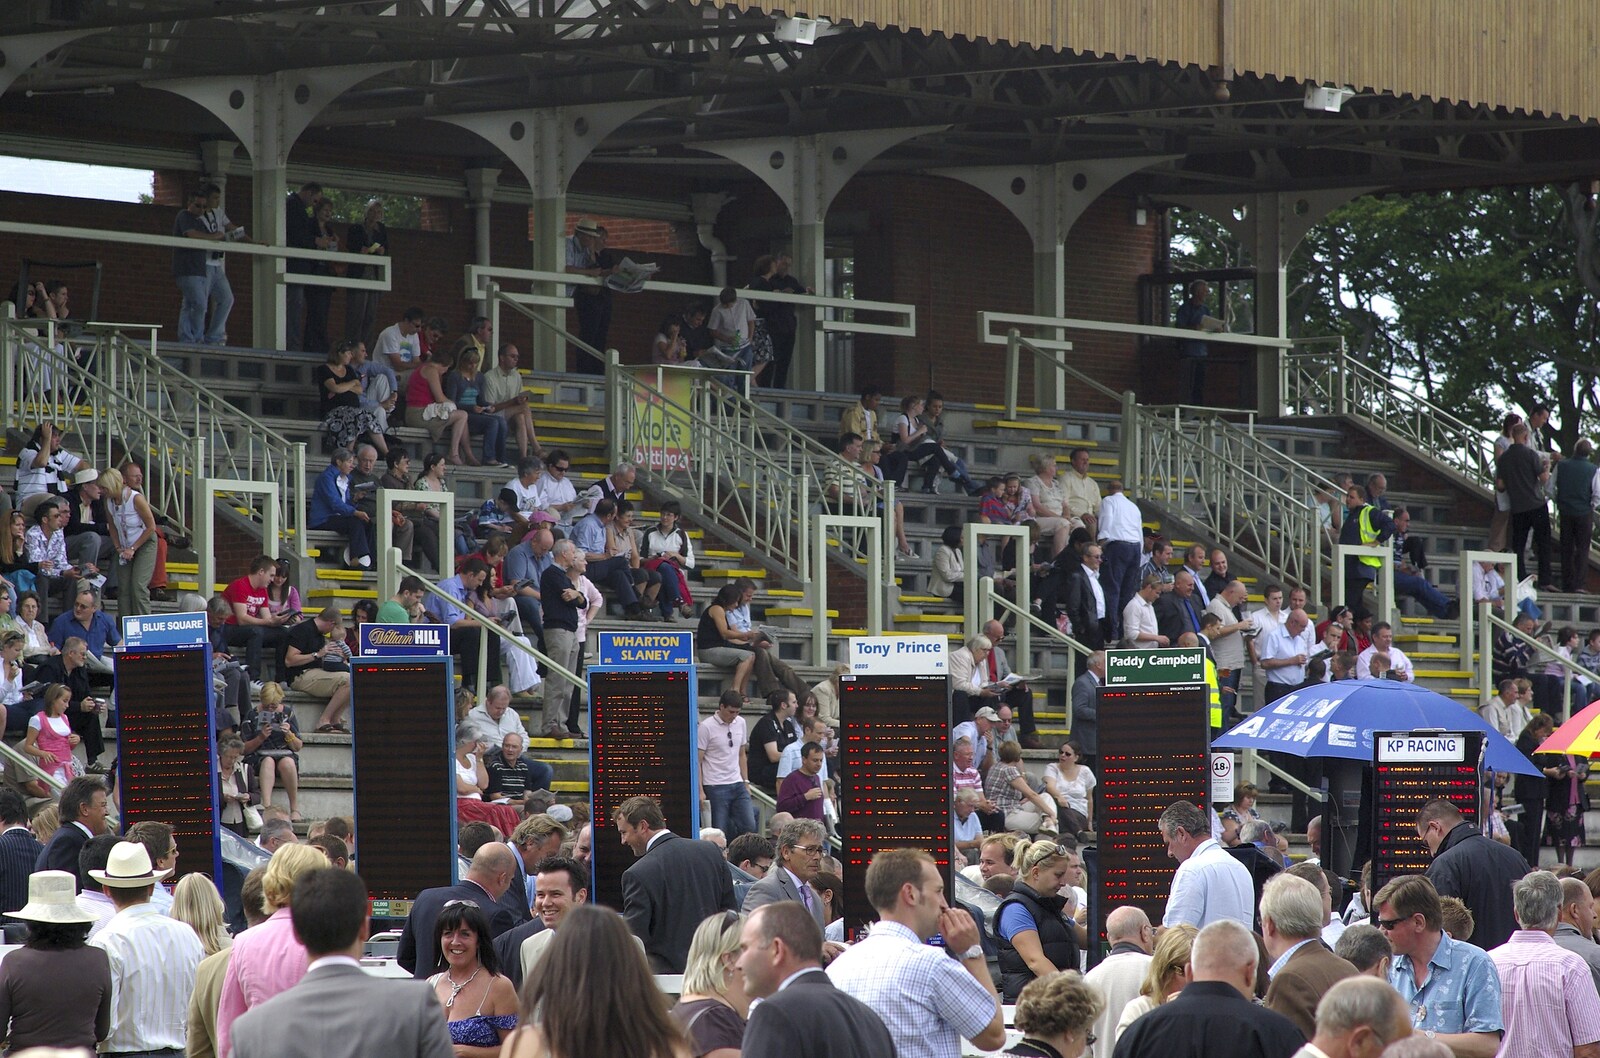 A Day At The Races, Newmarket, Suffolk - 23rd August 2008: Assembled crowds and bet boards